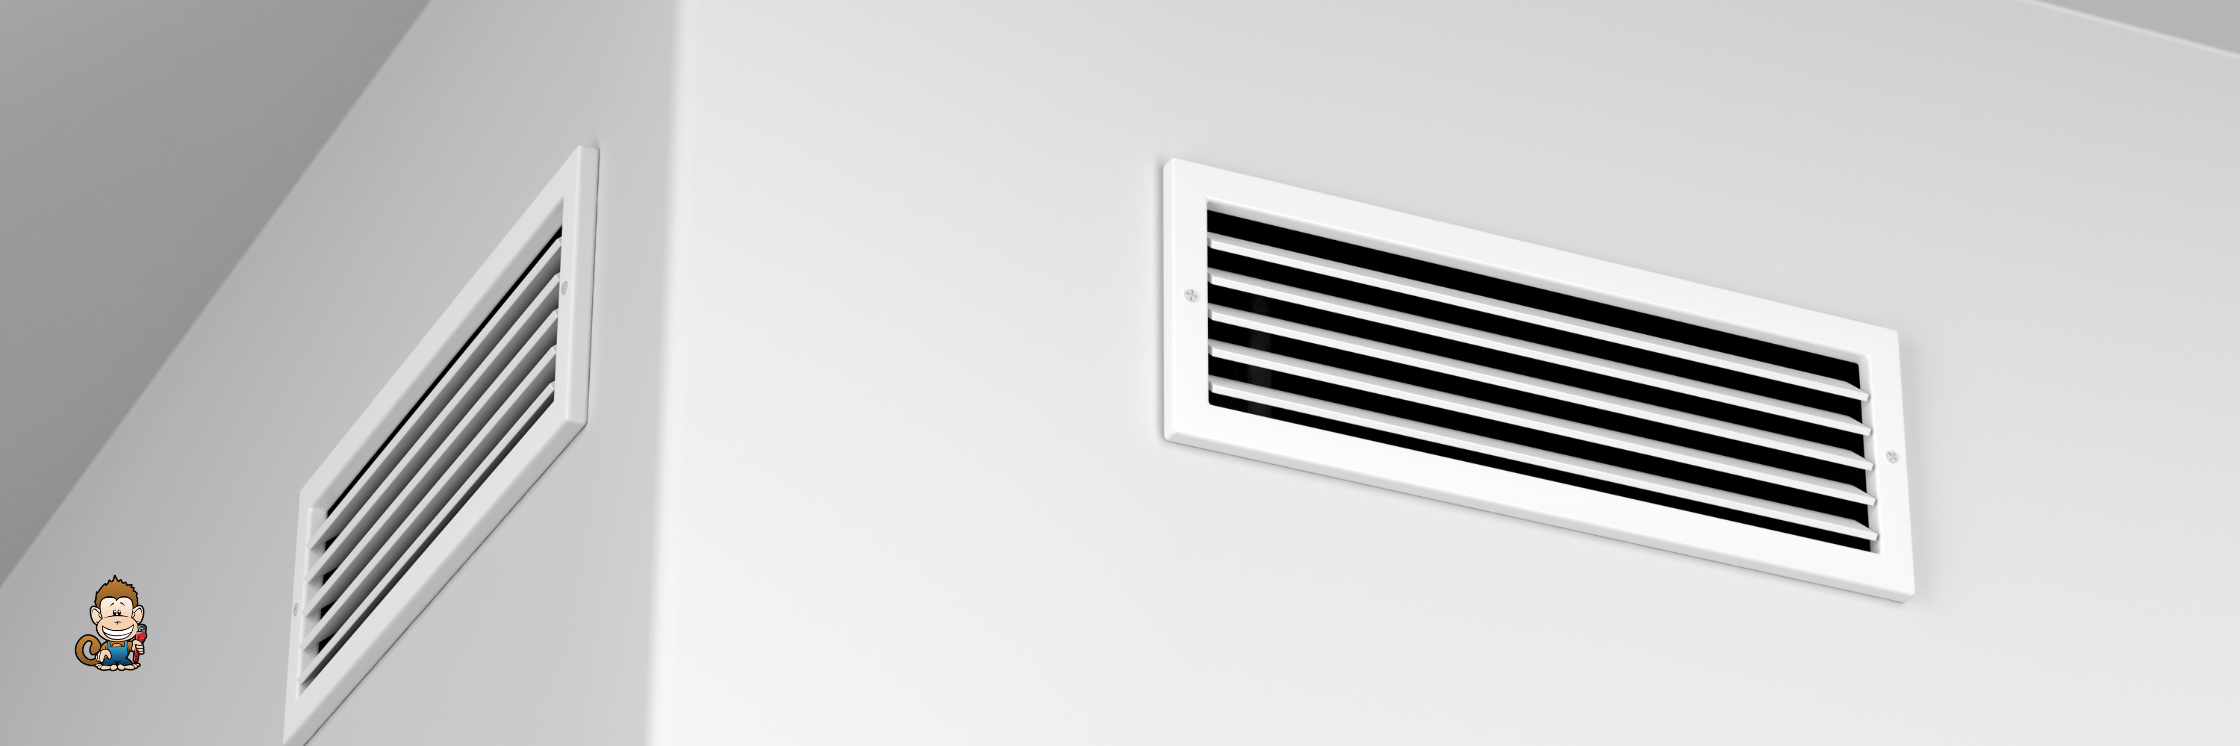 How to Choose the Right HVAC System for You